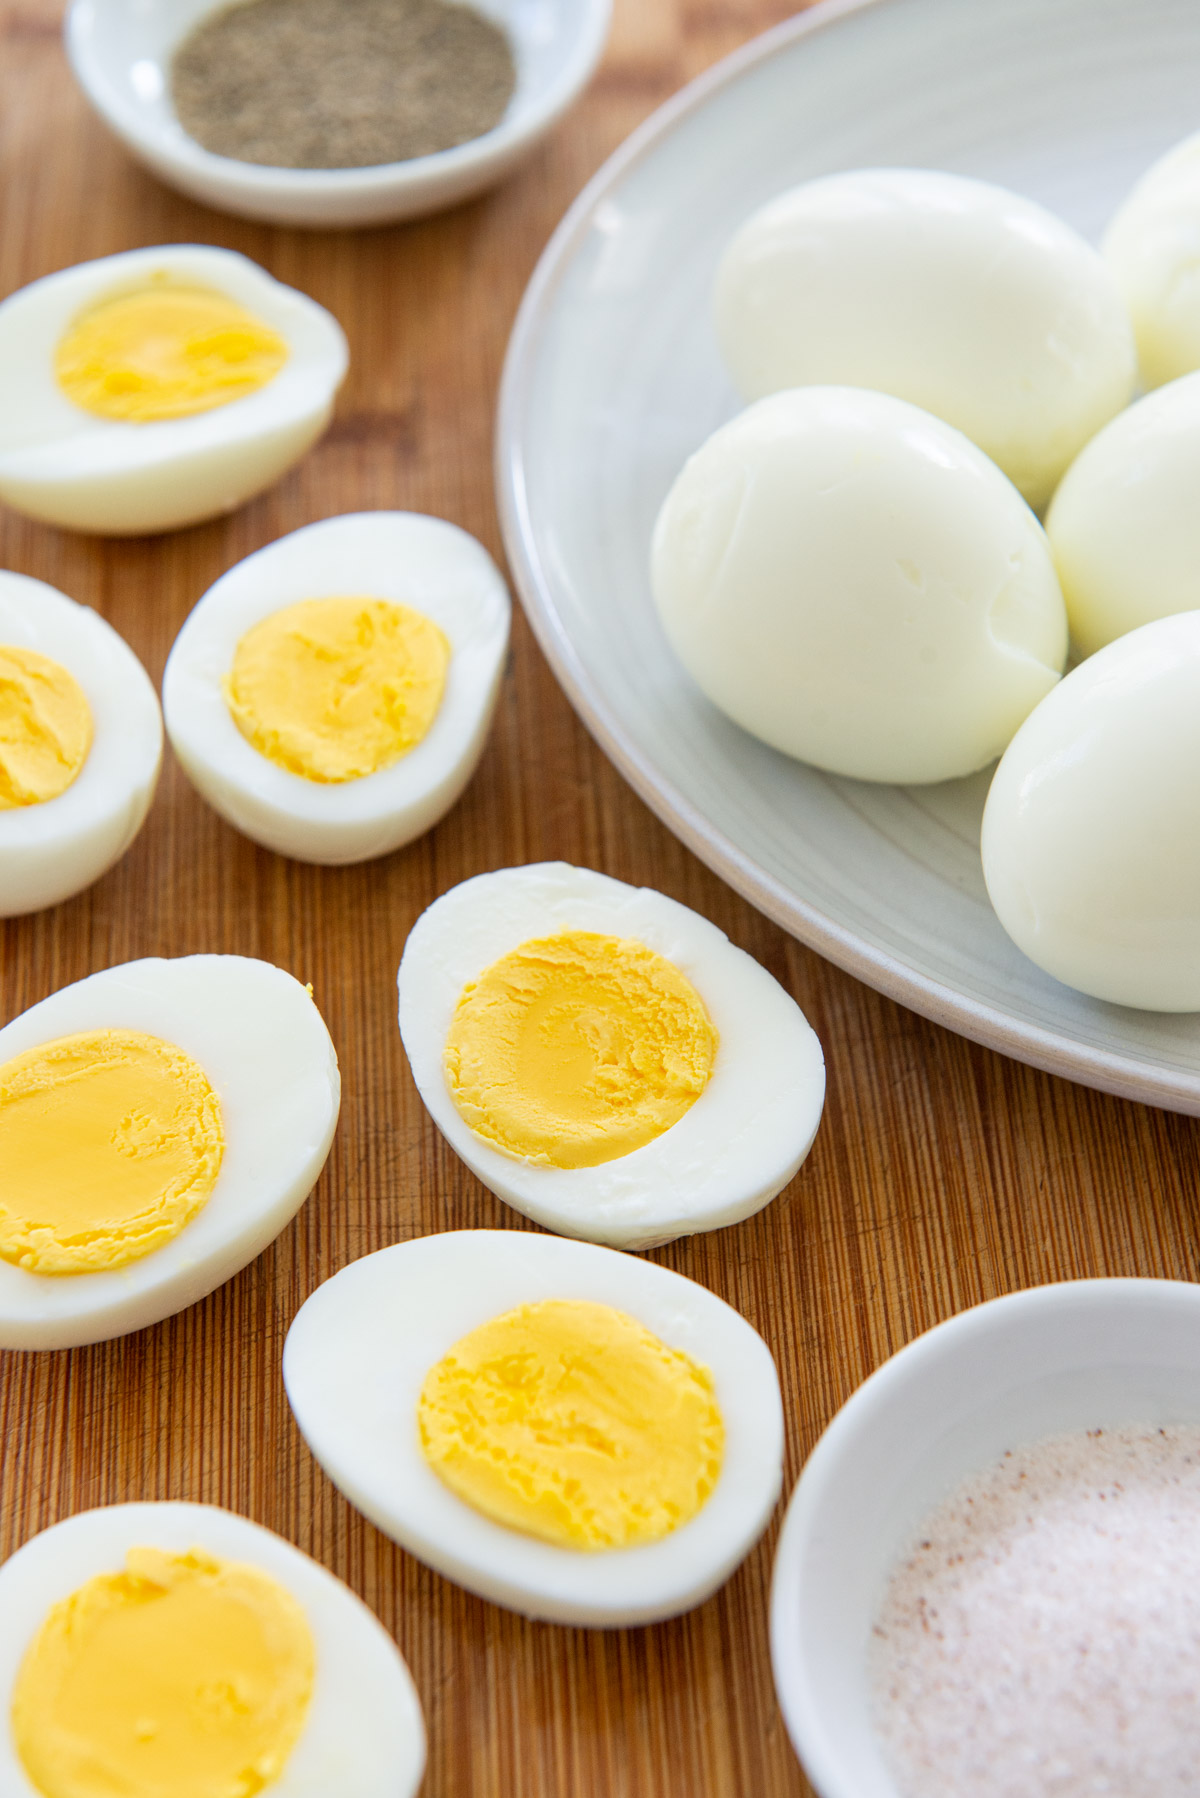 How to Peel Soft-Boiled Eggs - Insanely Good